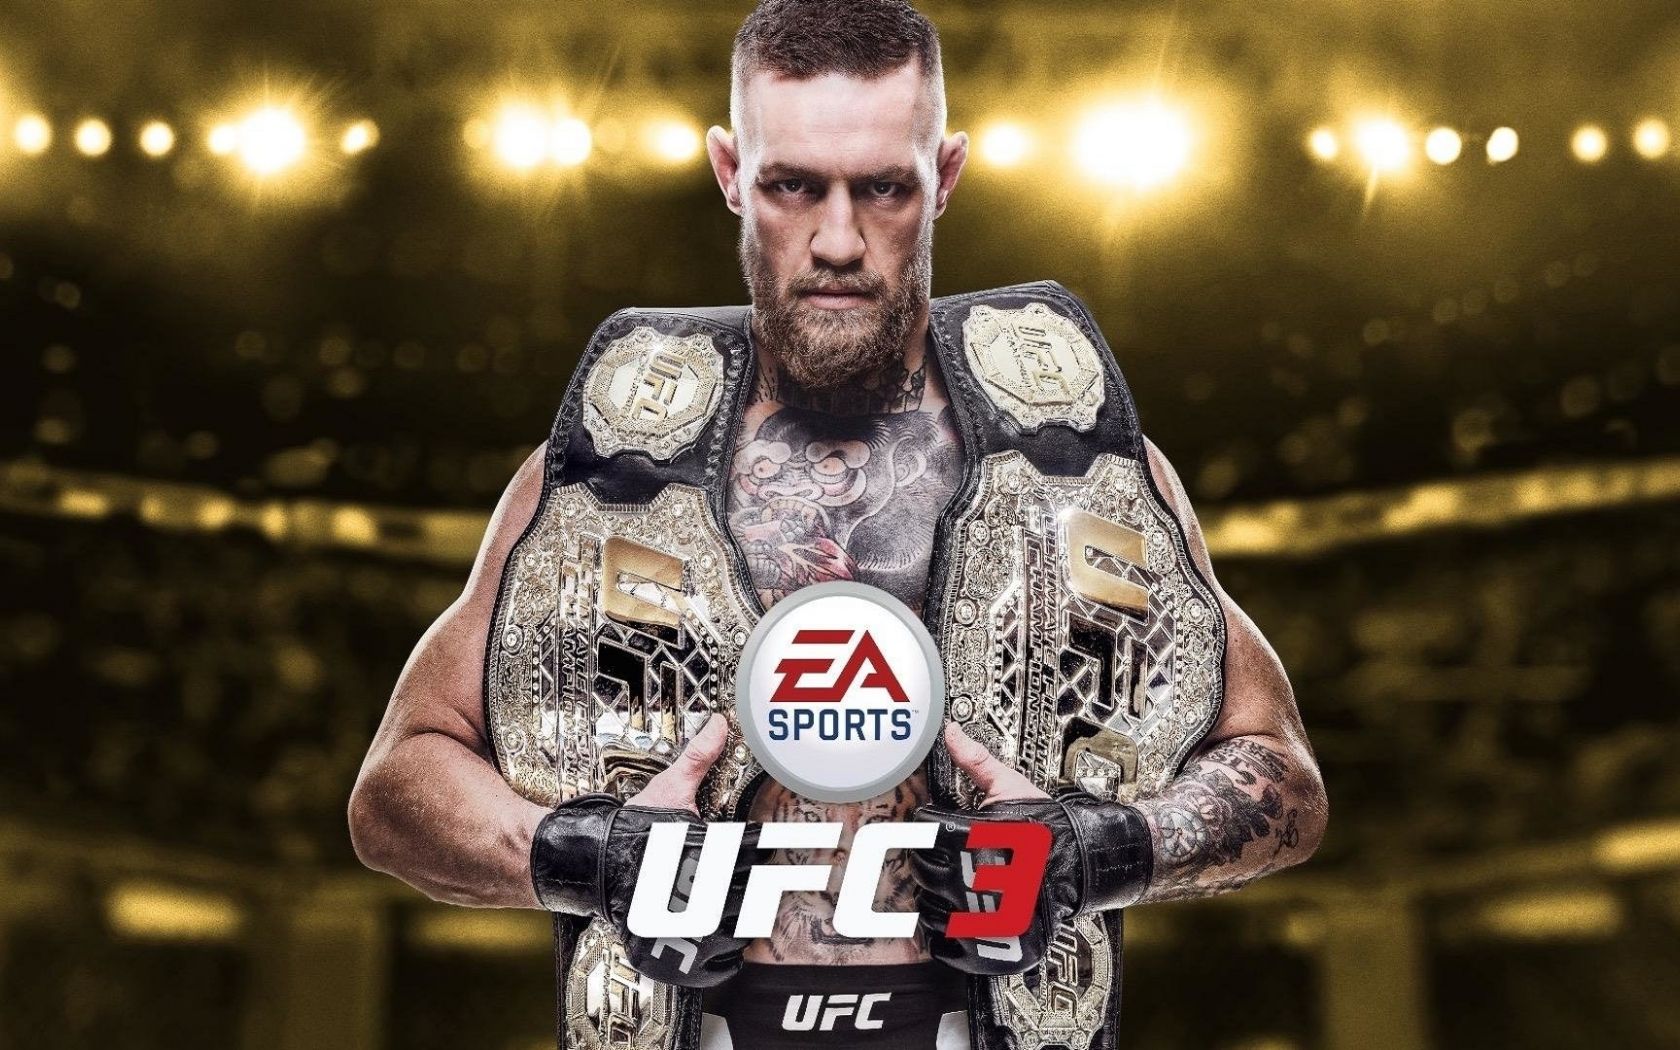 Free download Save EA Sports UFC 3 HD Wallpaper Read games review